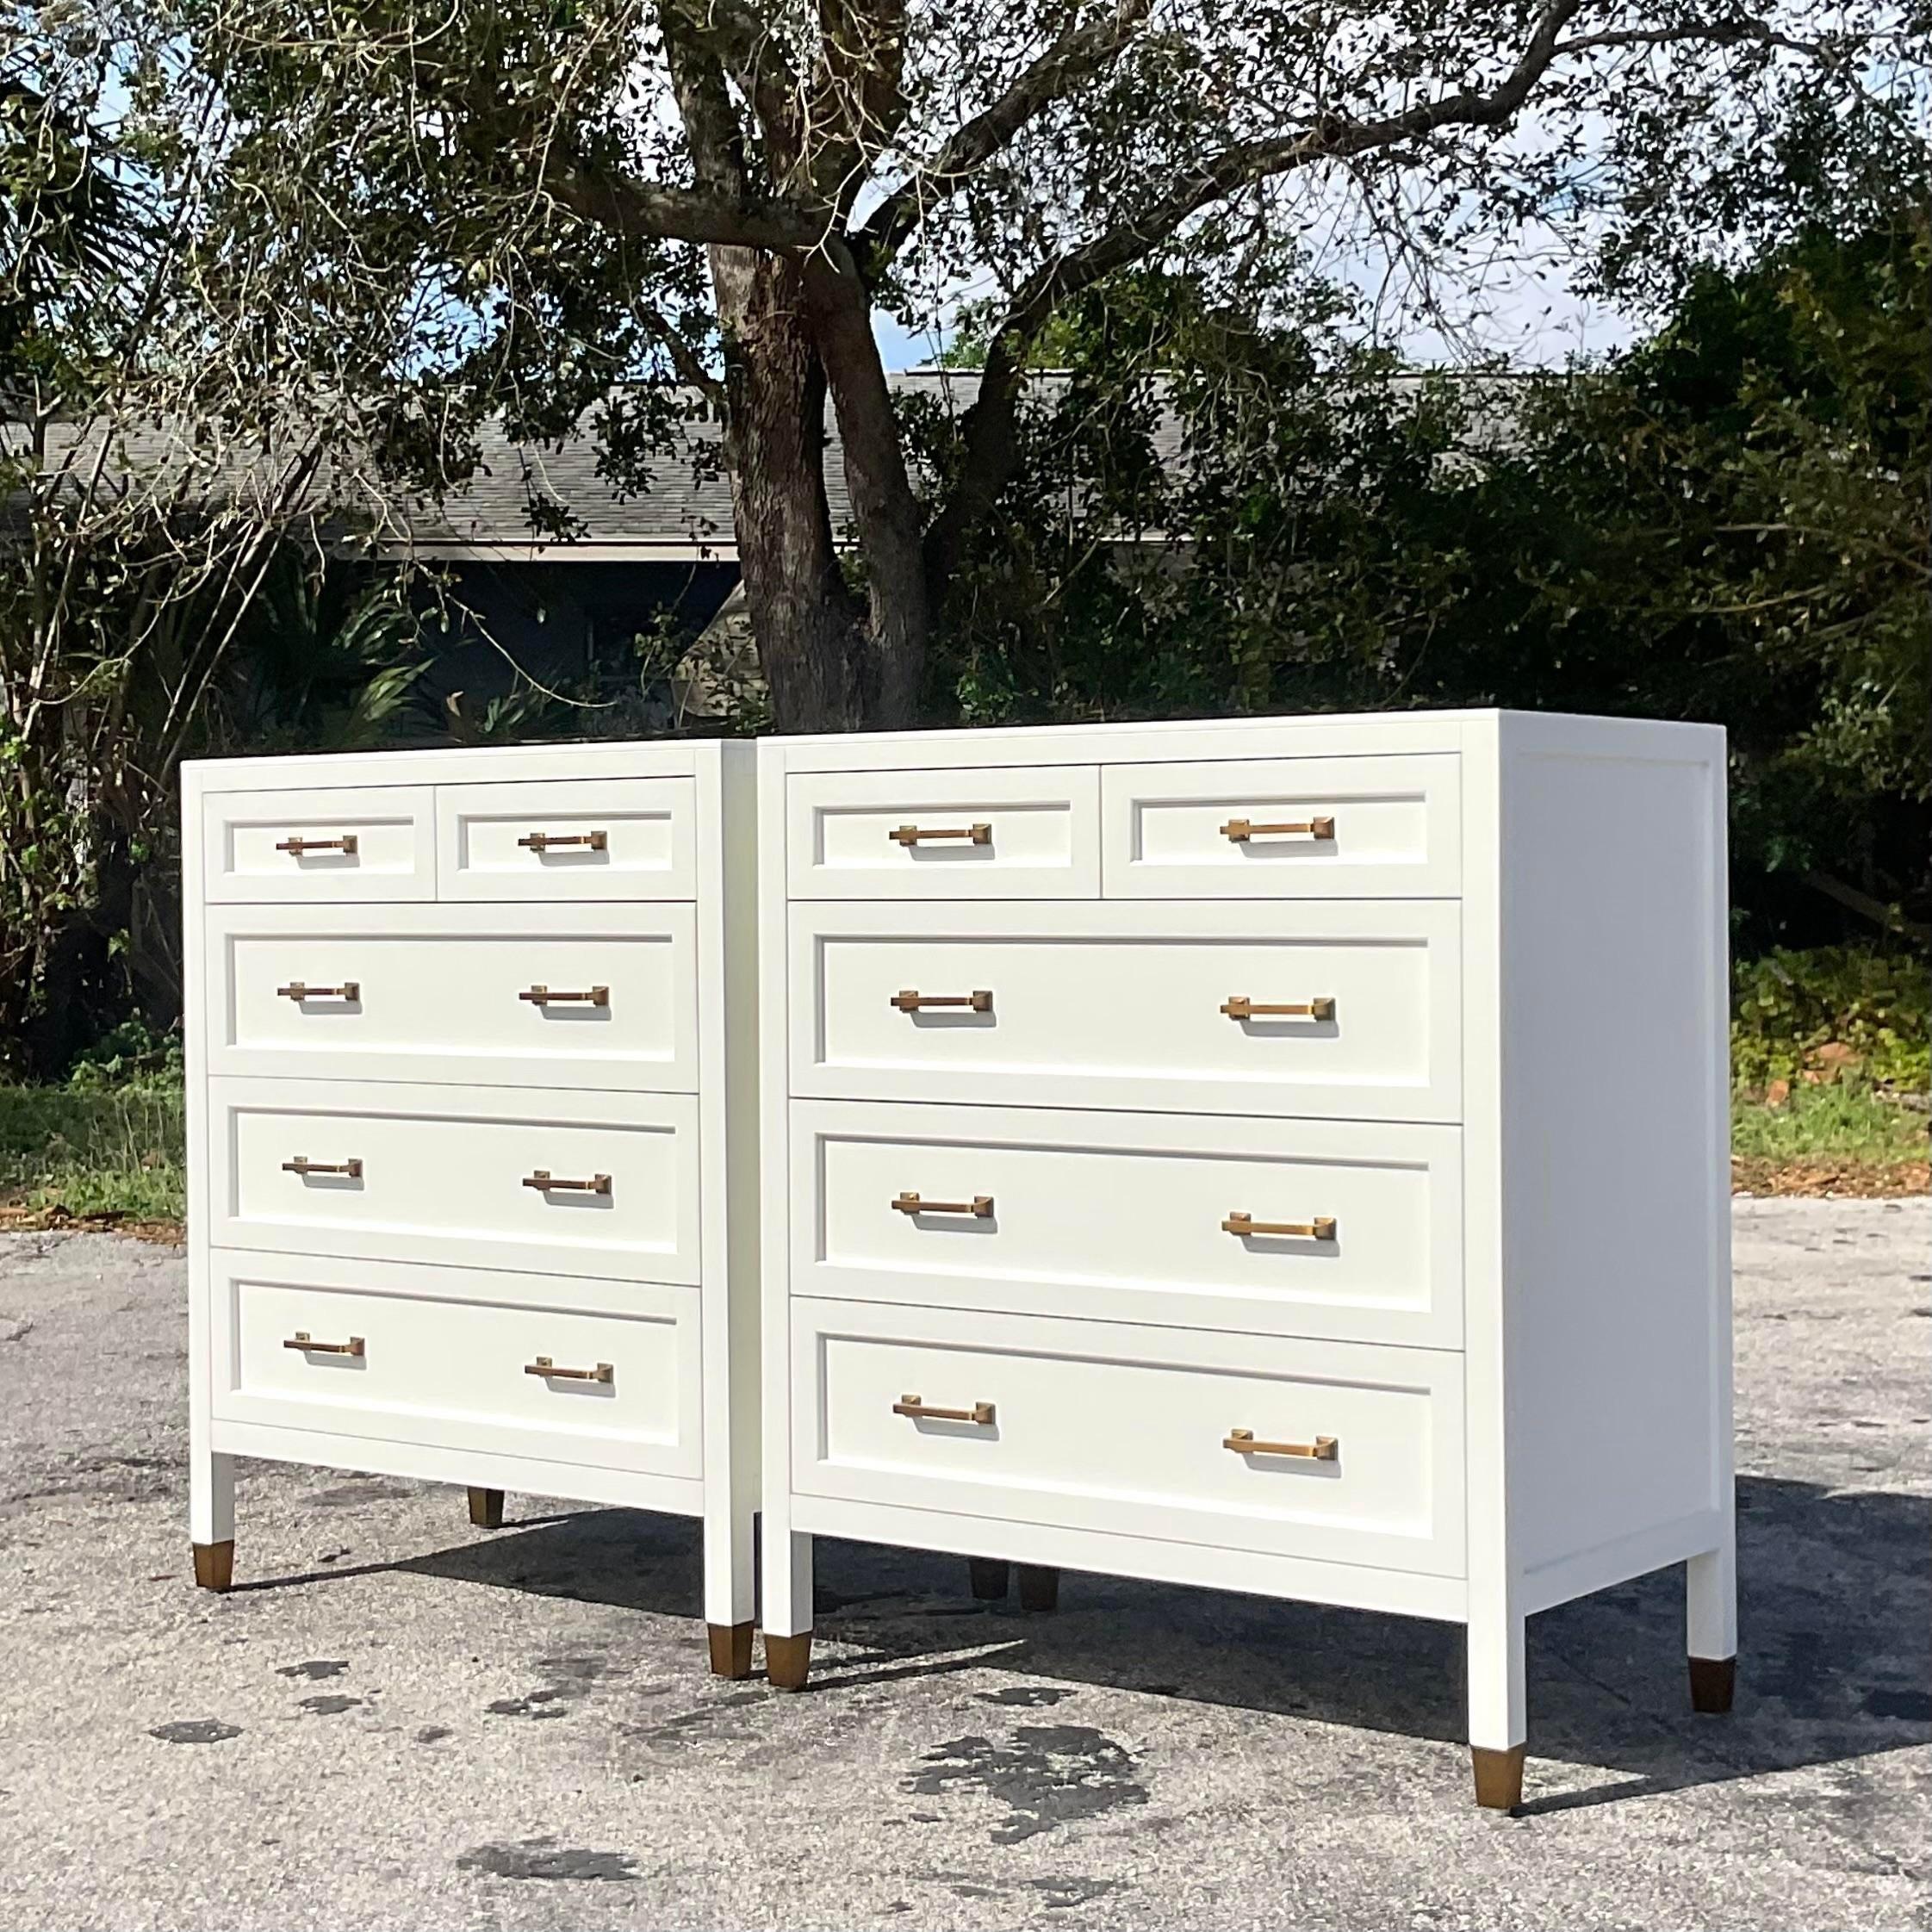 A lovely set of vintage Serena and Lily dressers. The come in a beautiful white with brass accents. Acquired at a Palm Beach estate